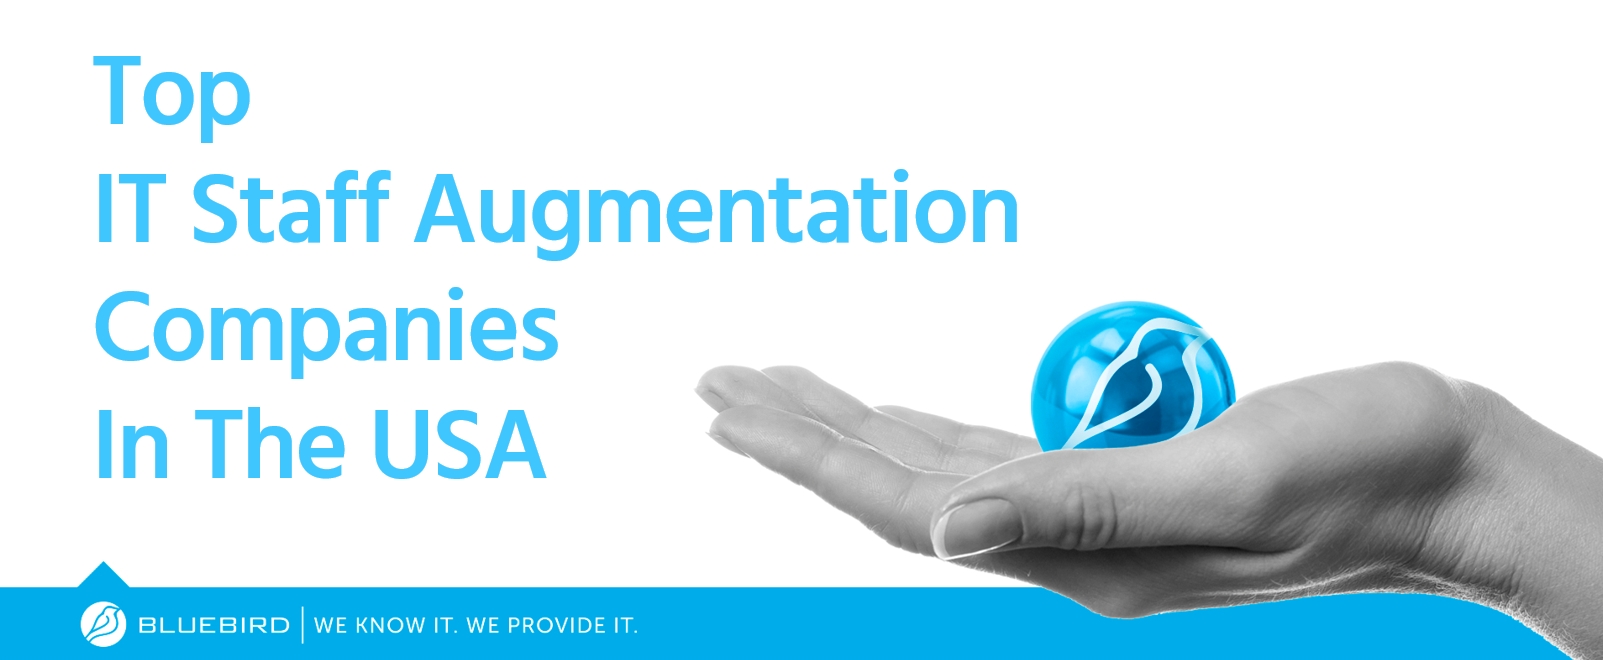 Top IT Staff Augmentation Companies in the USA